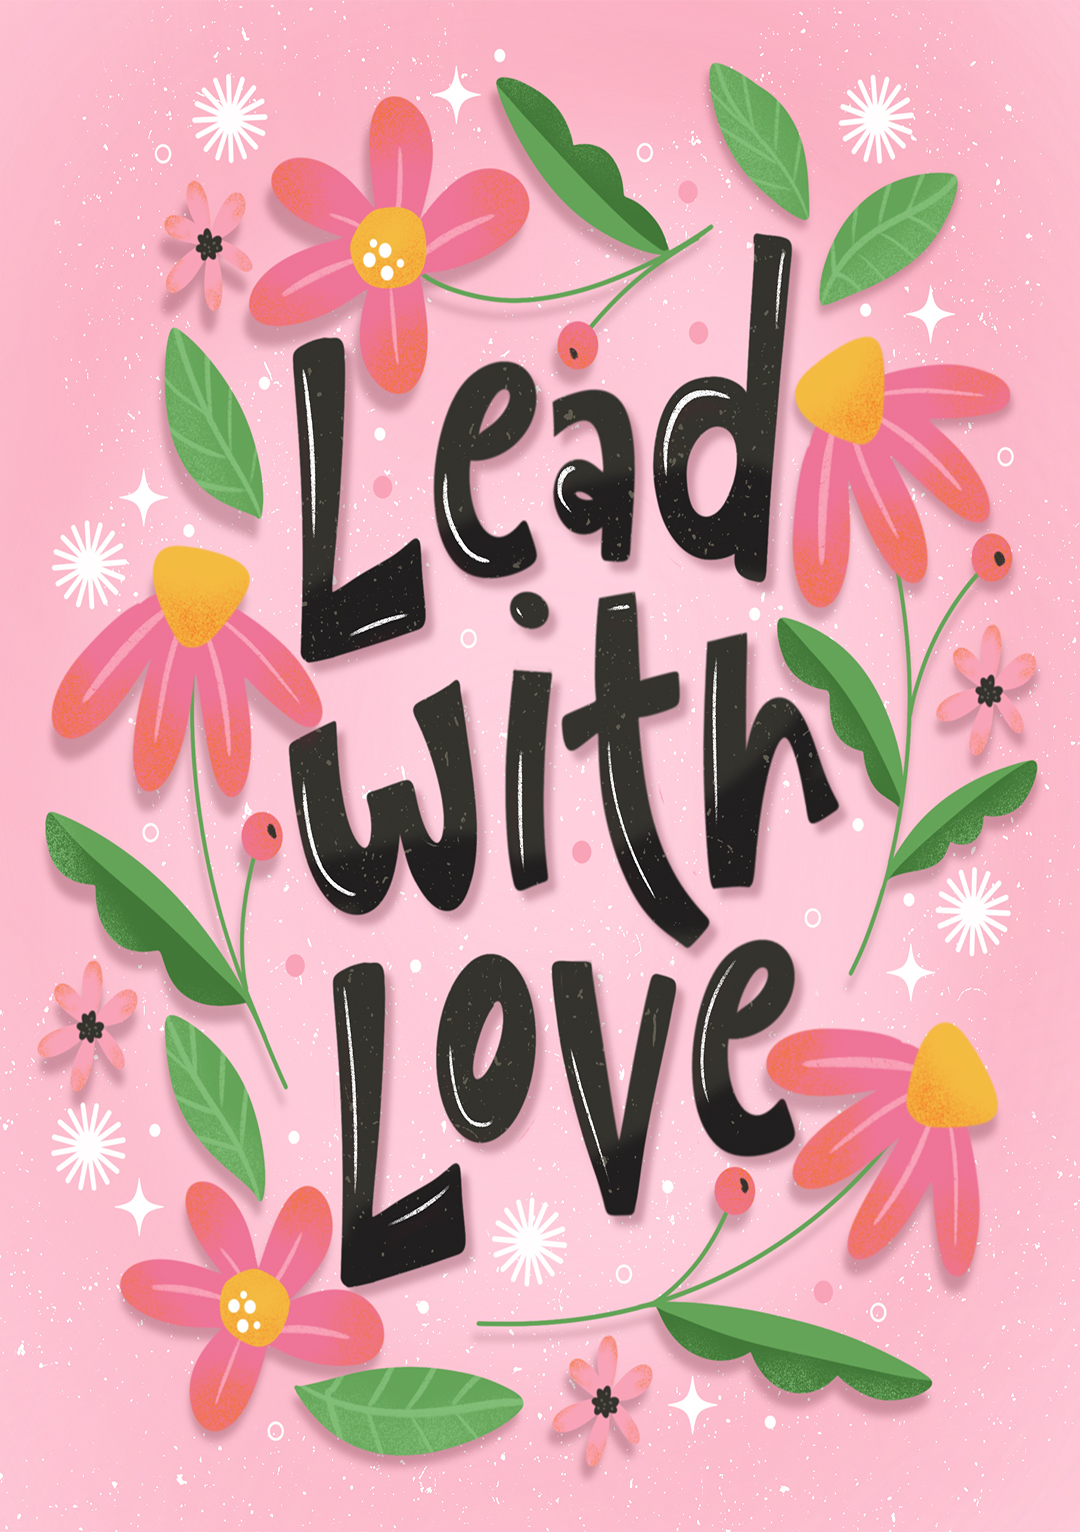 Lead With Love - Cute Greeting Card